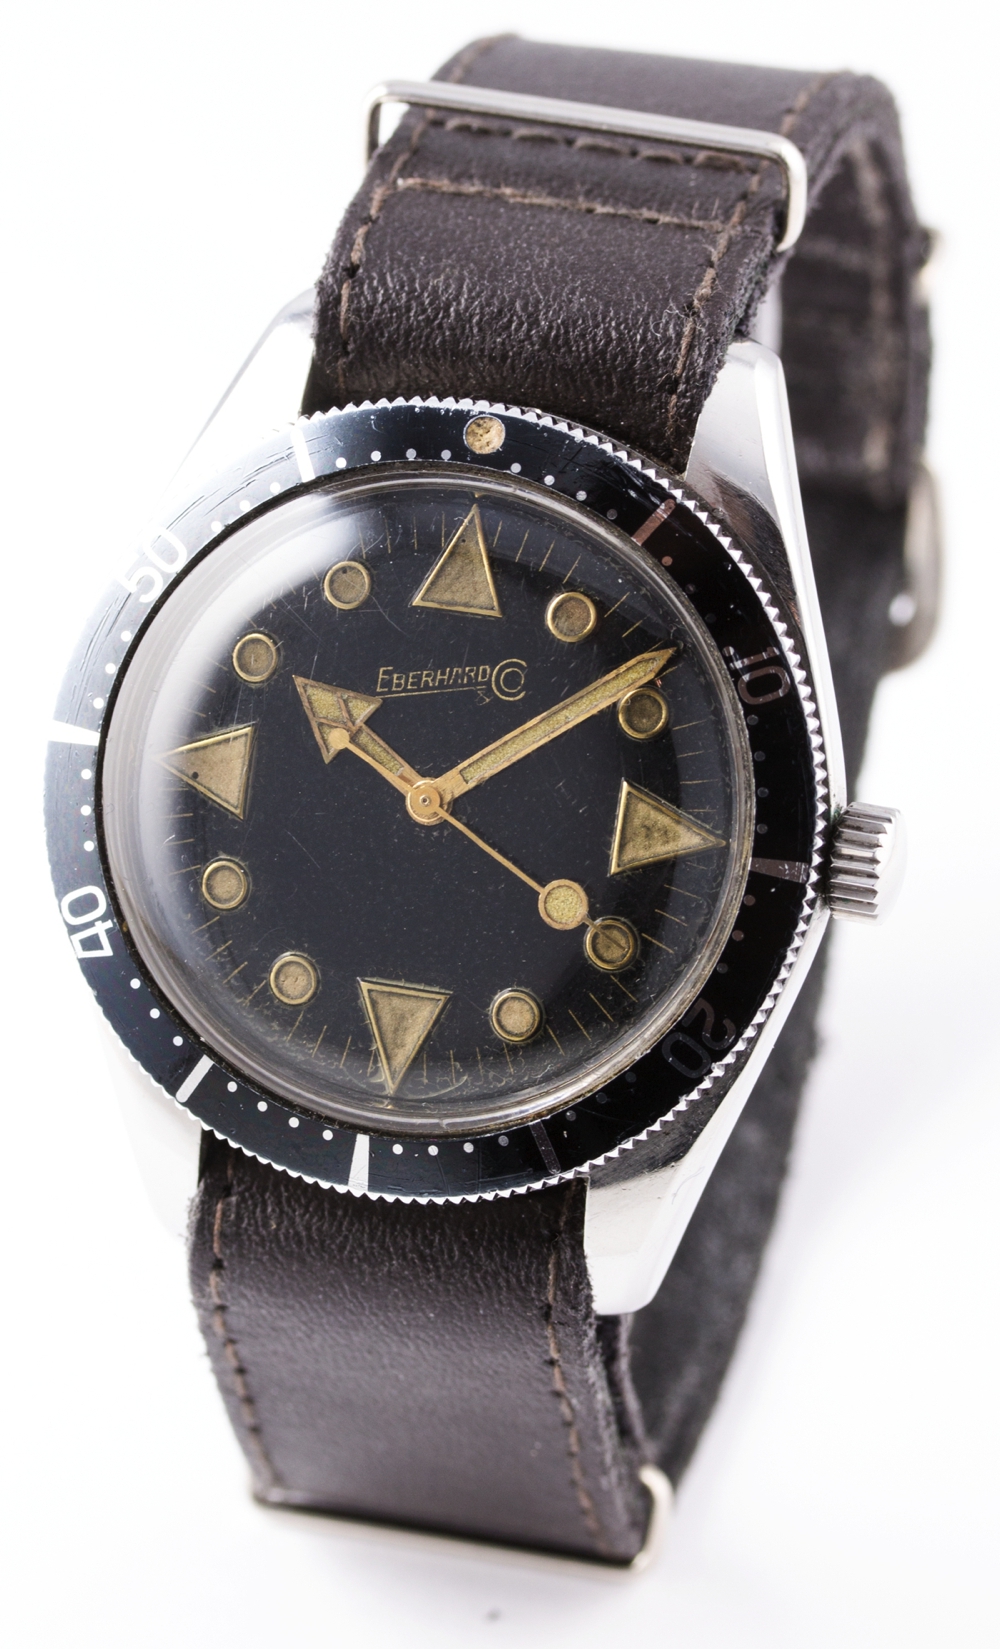 A RARE GENTLEMAN'S STAINLESS STEEL EBERHARD & CO AUTOMATIC DIVERS WRIST WATCH CIRCA 1961, NUMBER 247 - Image 3 of 9